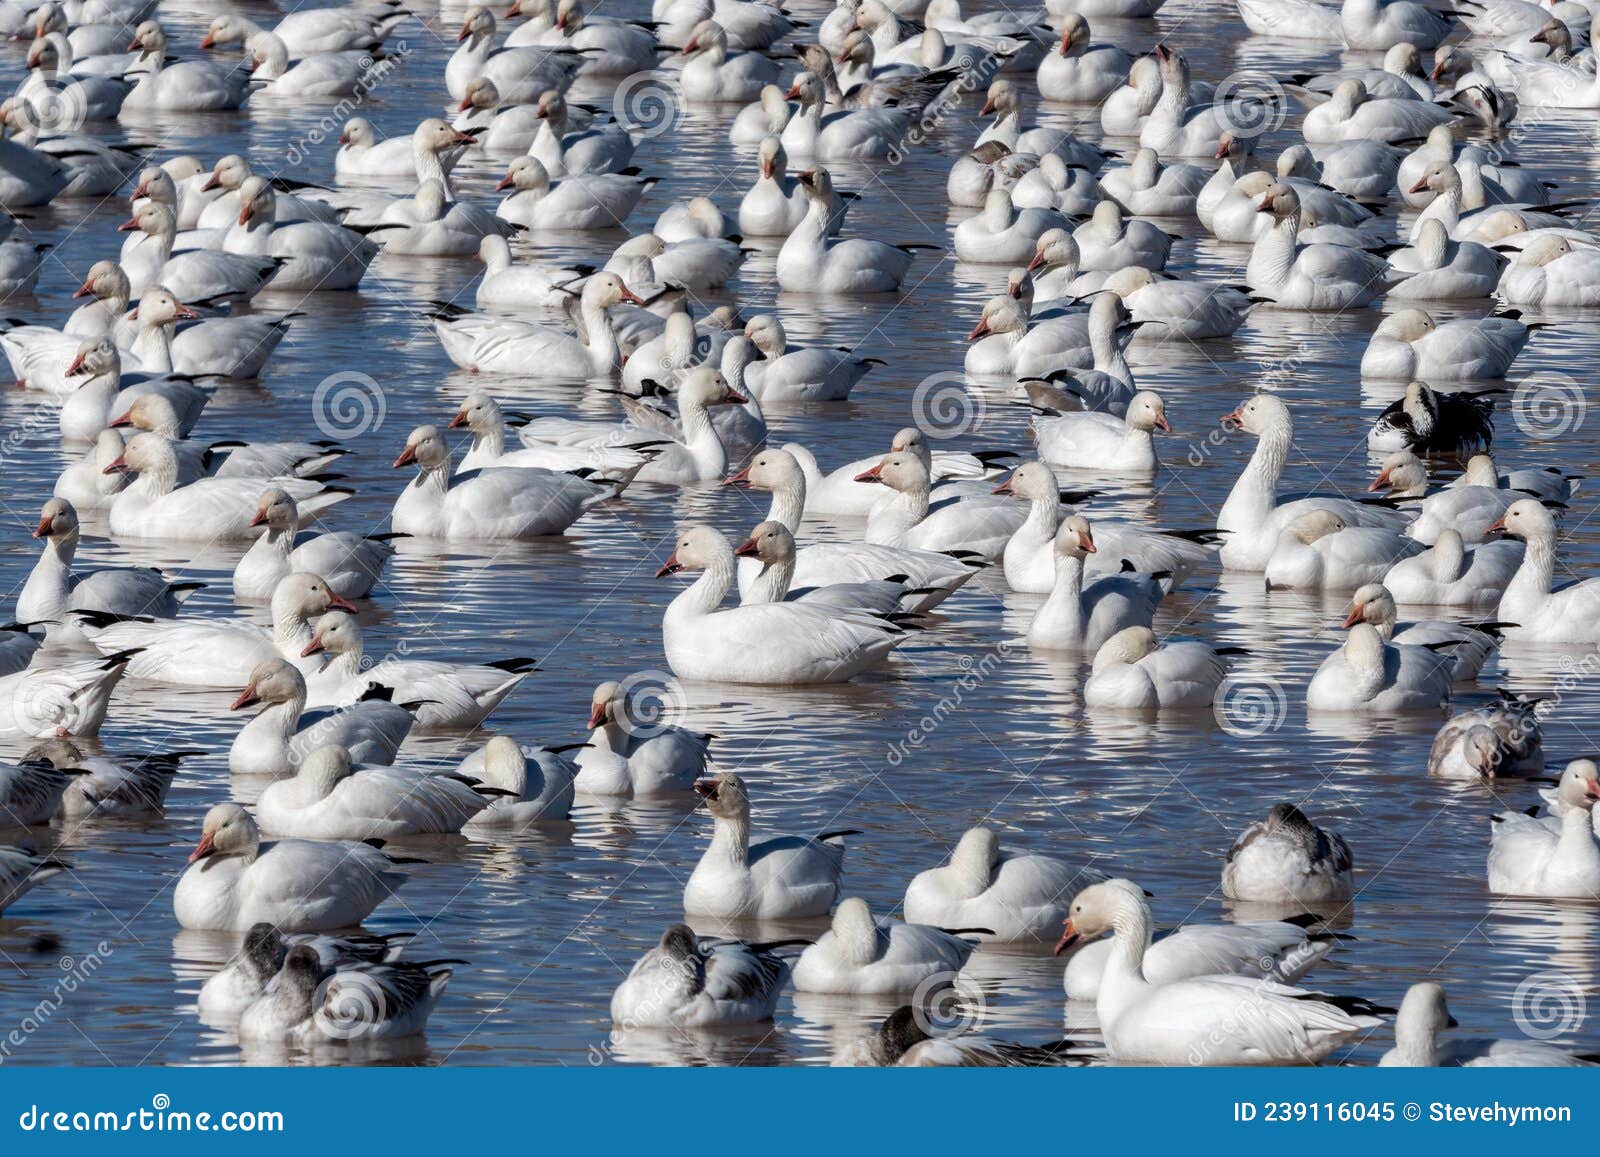 snow geese crowding lake at bosque del apache